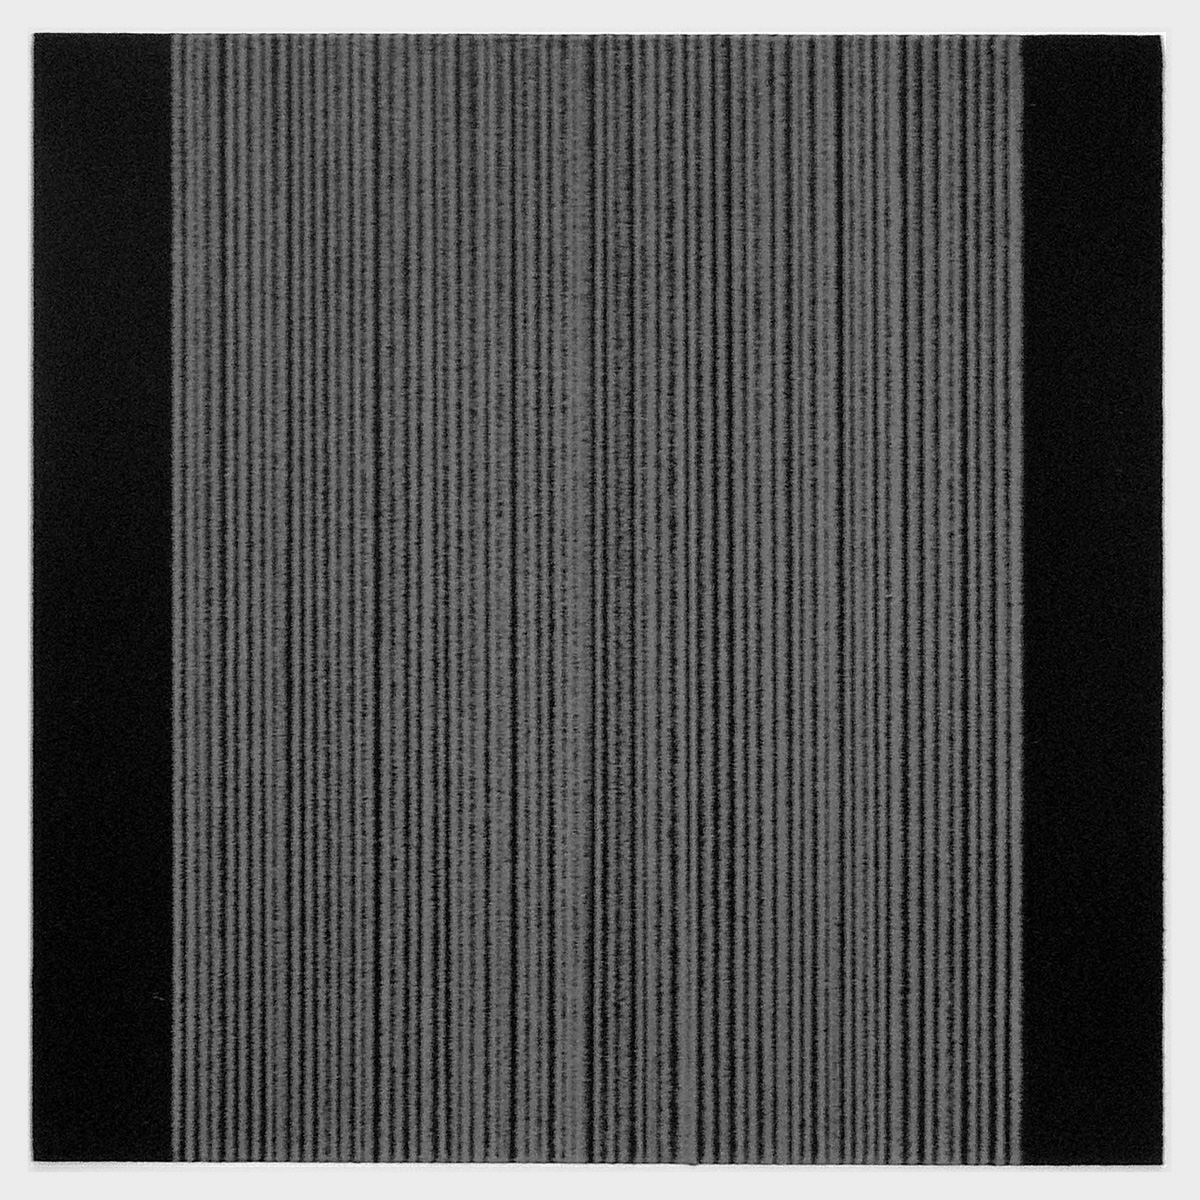 Black ground 4, 200216,5 x 16,5 cm in 25,2 x 24,7 cmColoured pencil on paper; framed 